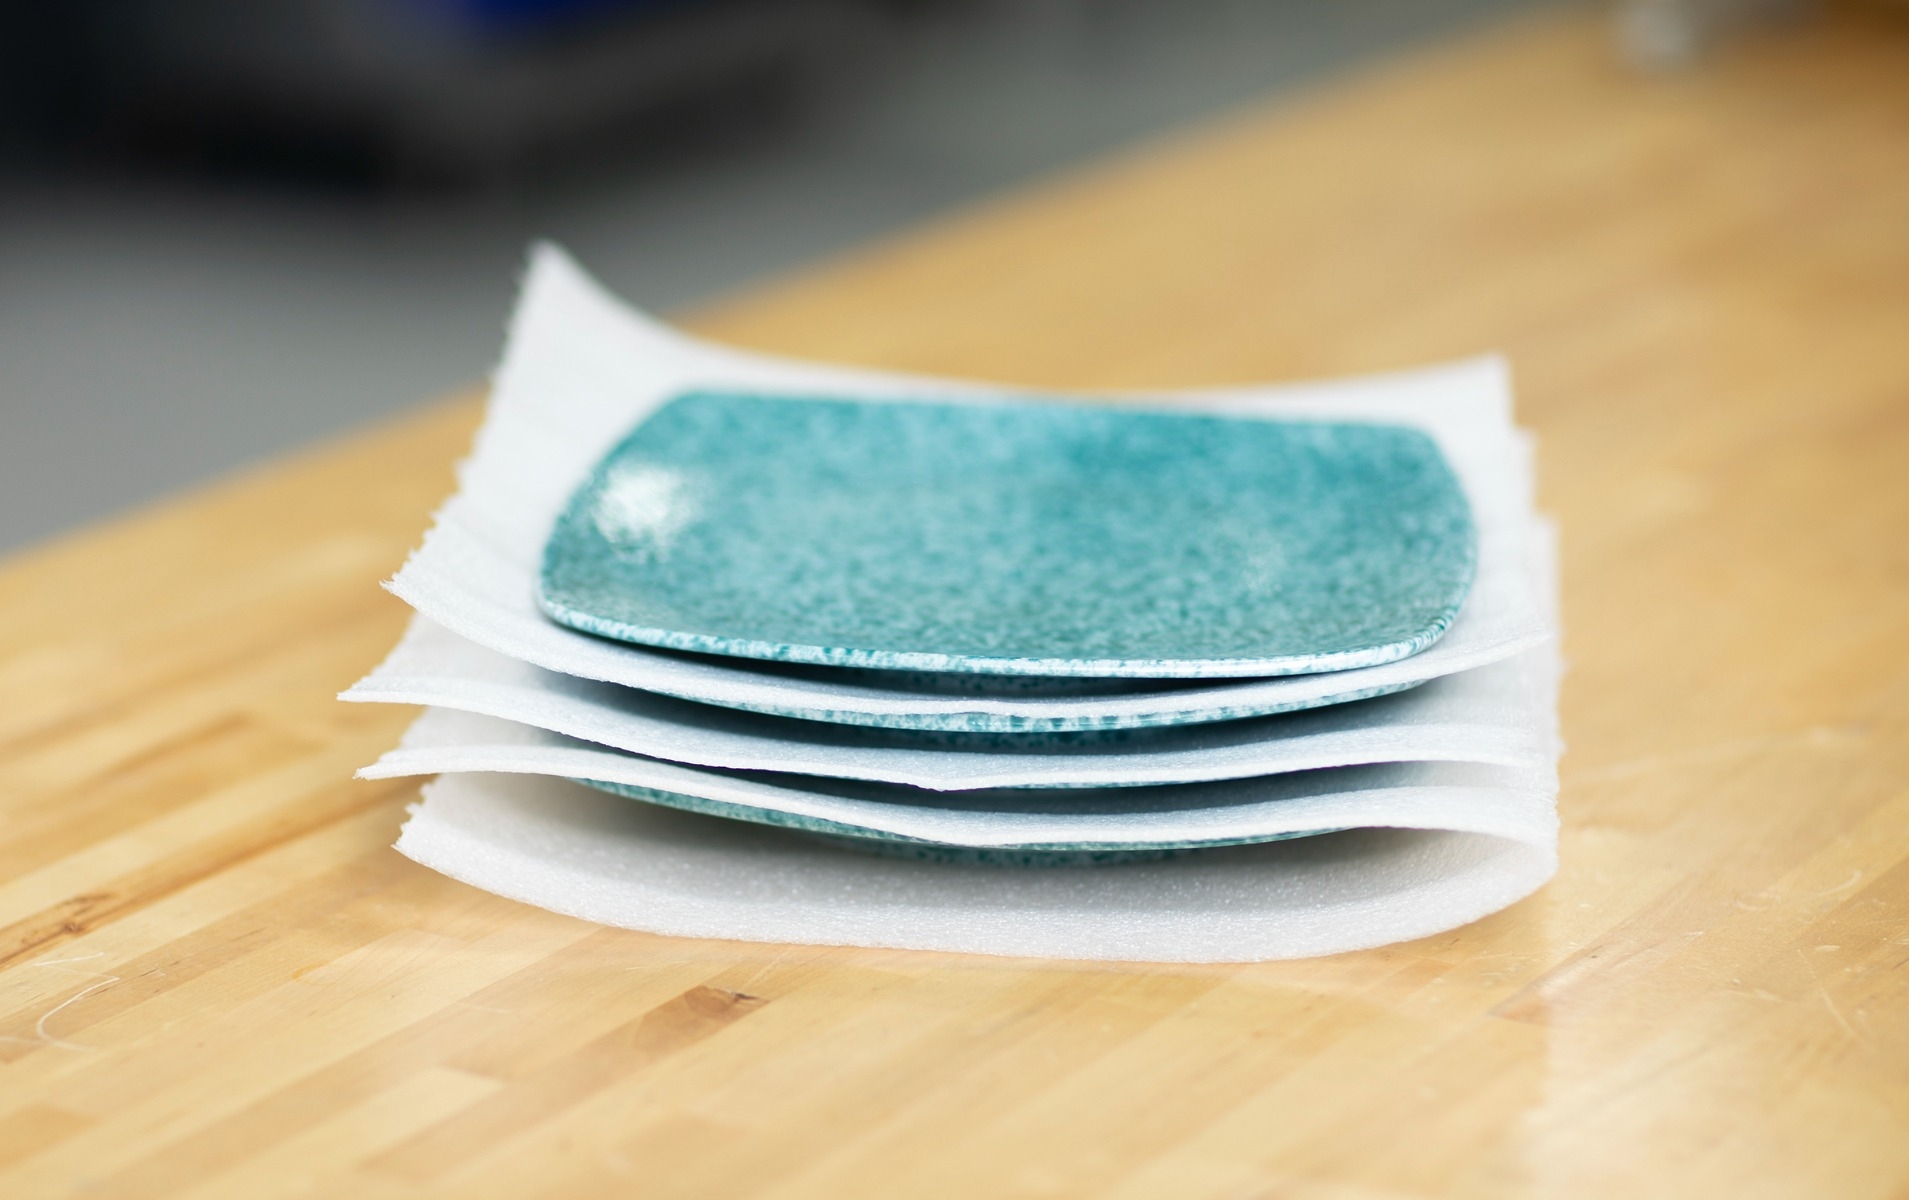 blue plates stacked on wood table with pregis foam sheets placed in between each plate